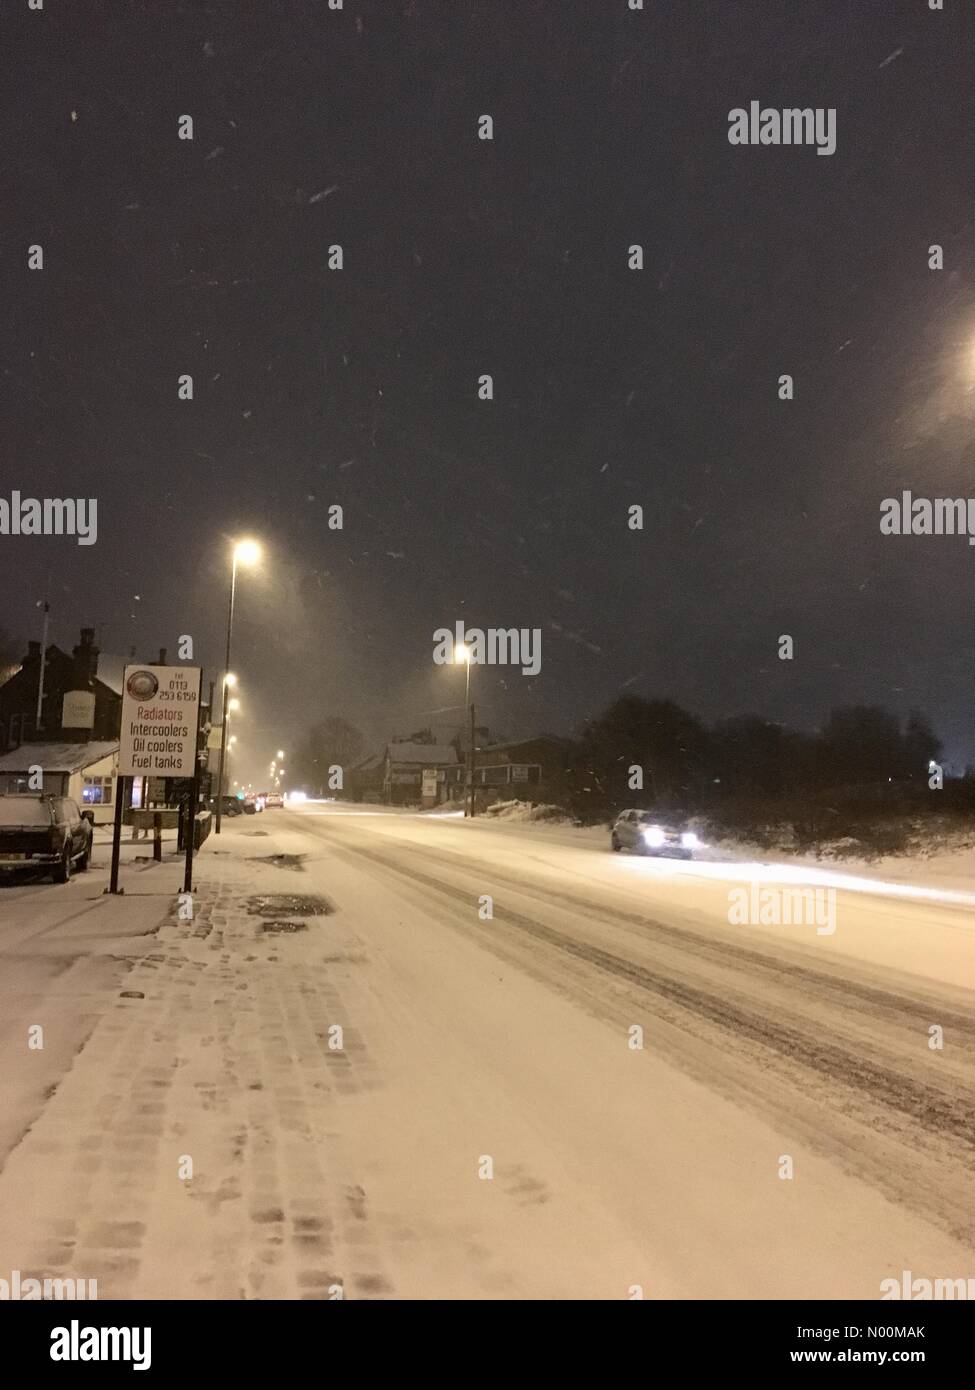 UK weather - 17th March 2018 Morley, Leeds. Snowfall has caused difficult driving conditions on the A650 in Morley near Leeds. Stock Photo